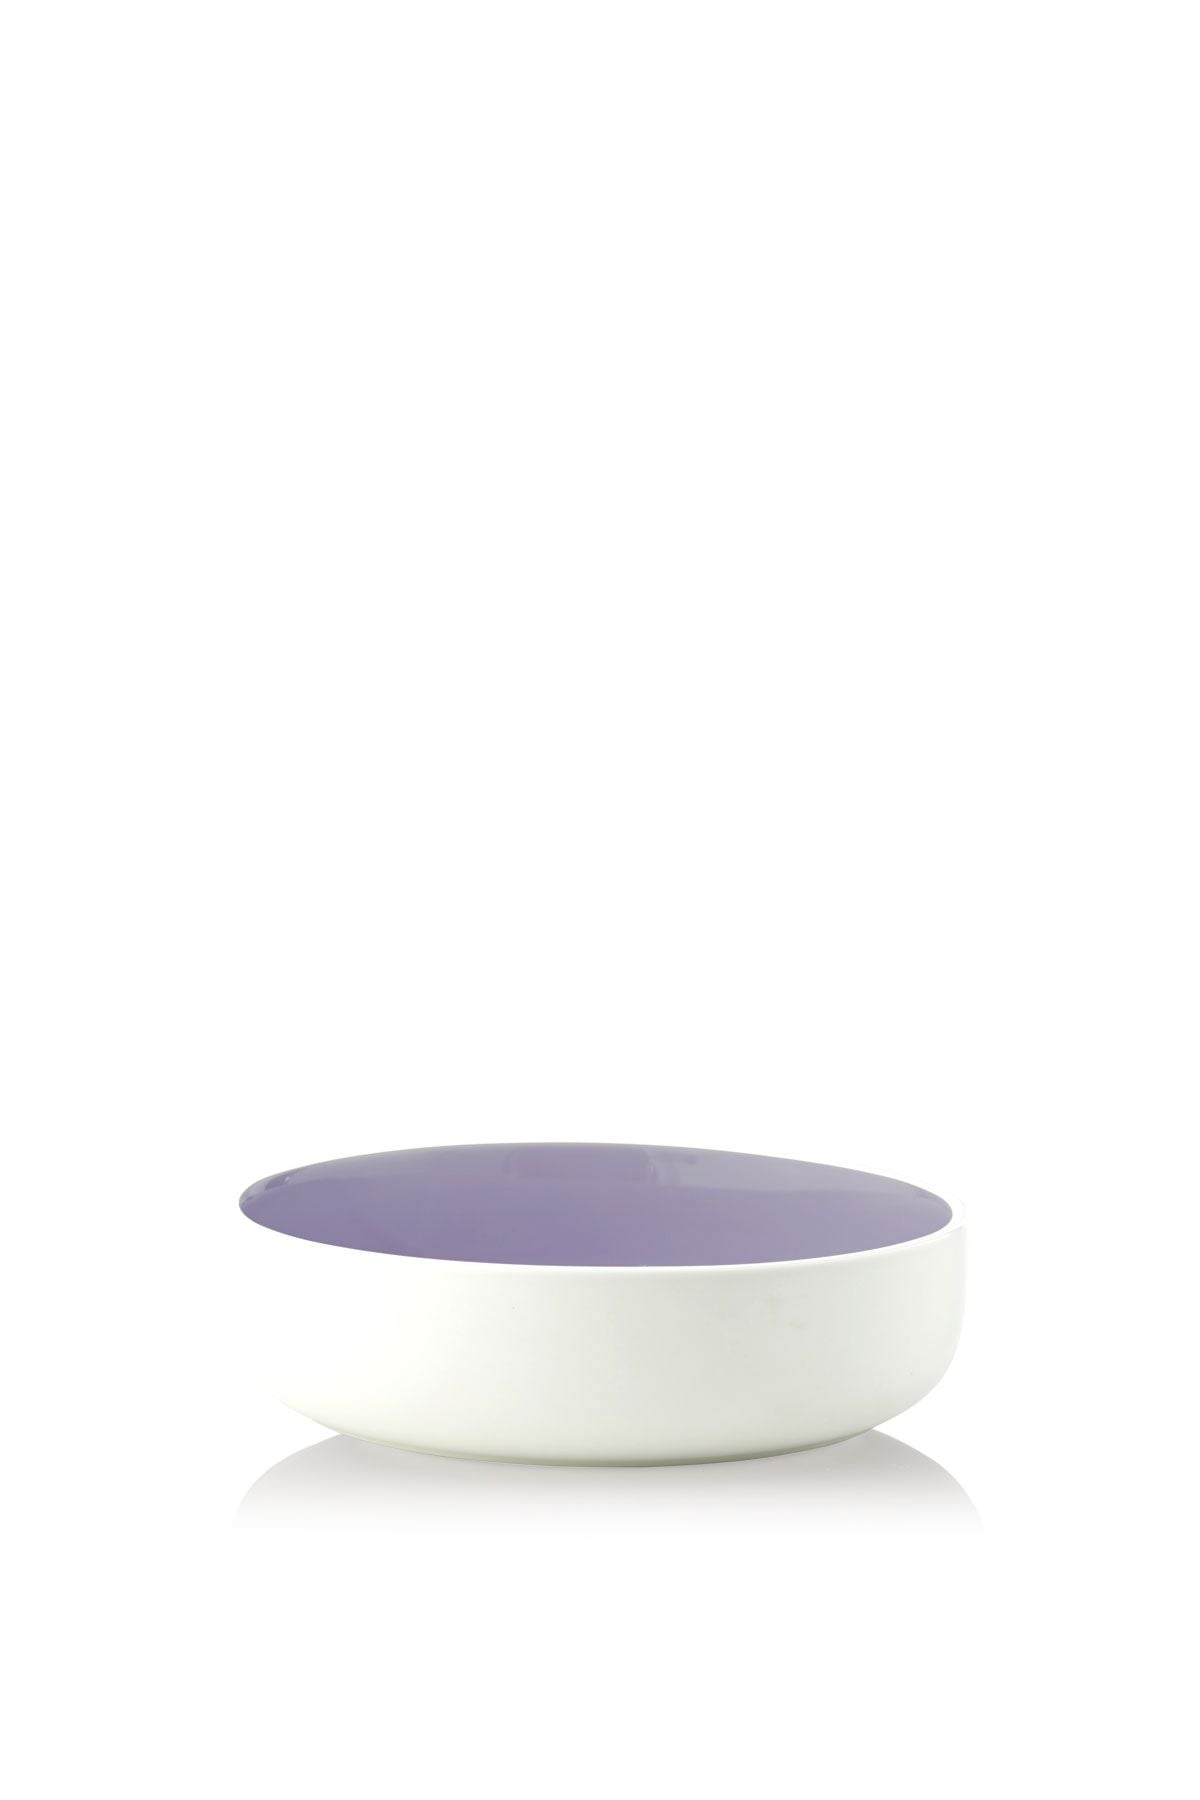 Studio About Clayware Serving Bowl, Ivory/Light Purple